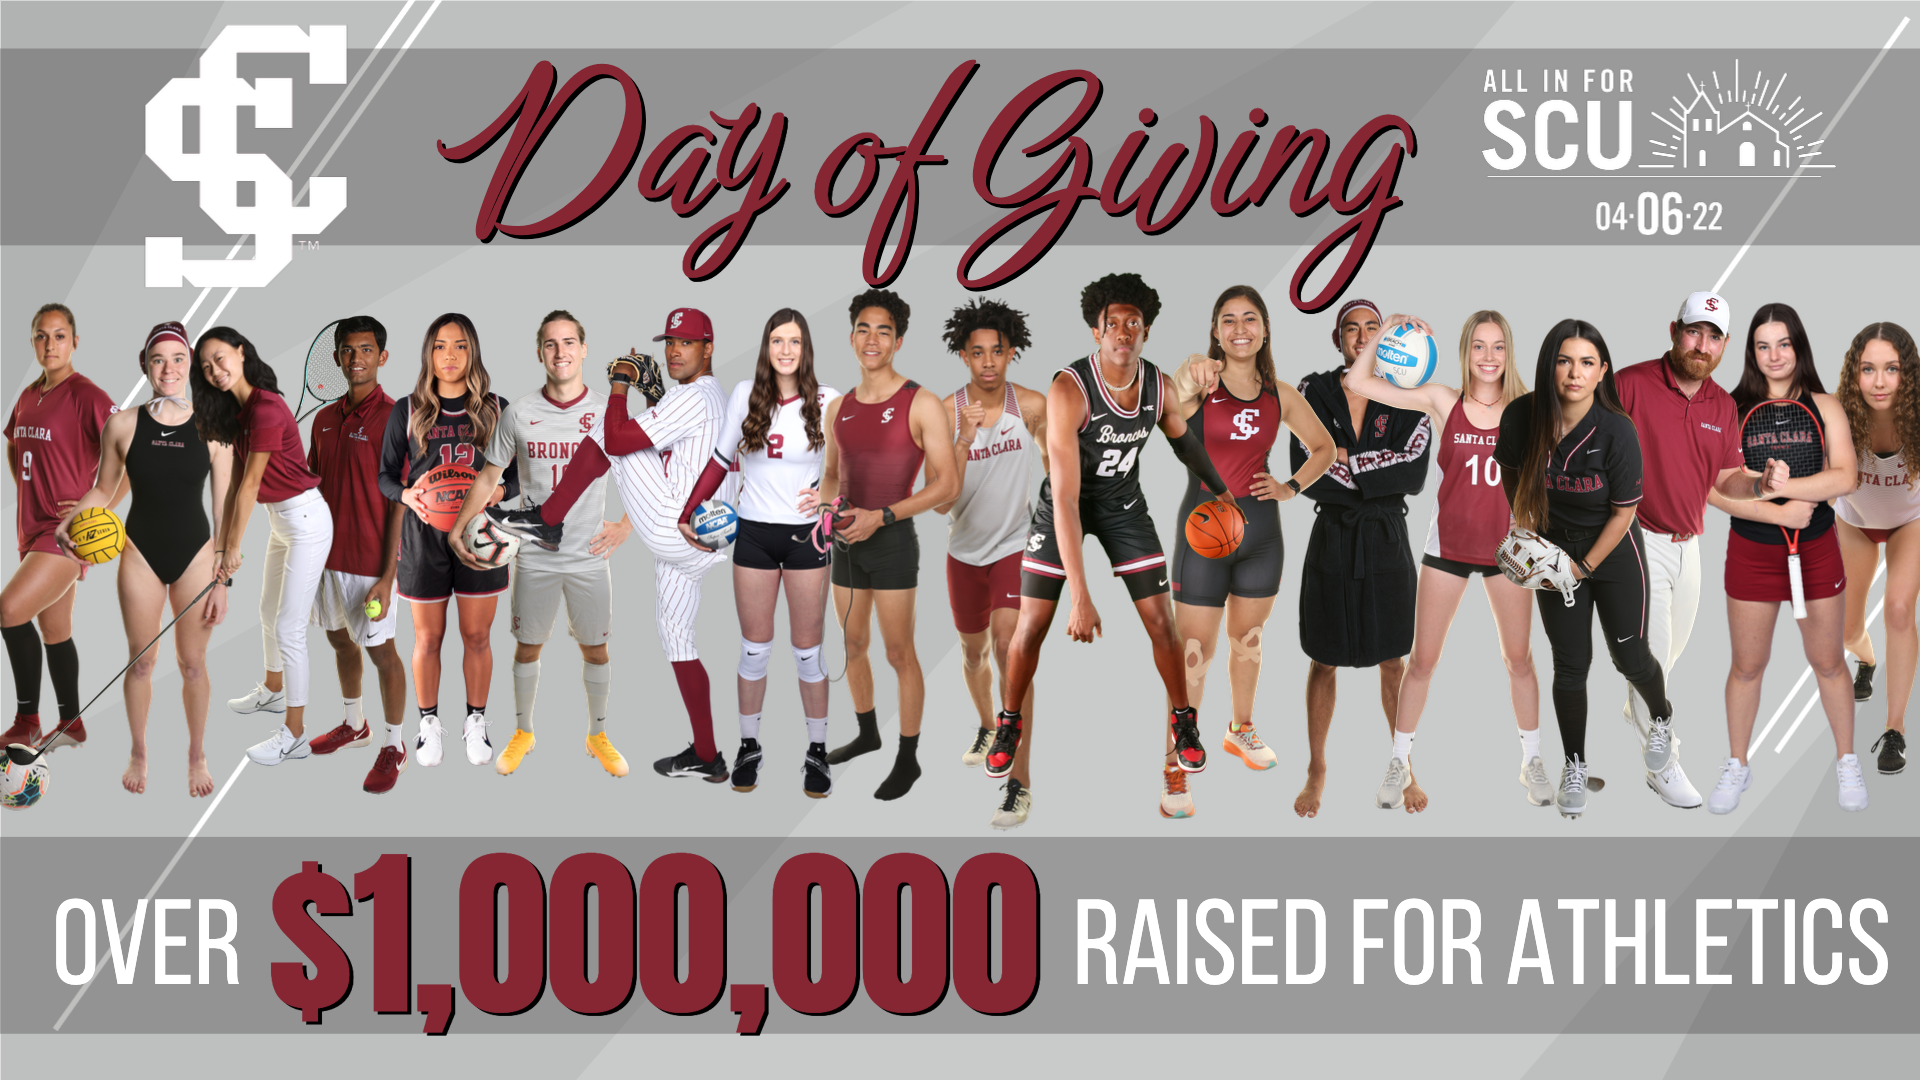 Athletics Has Historic Day of Giving